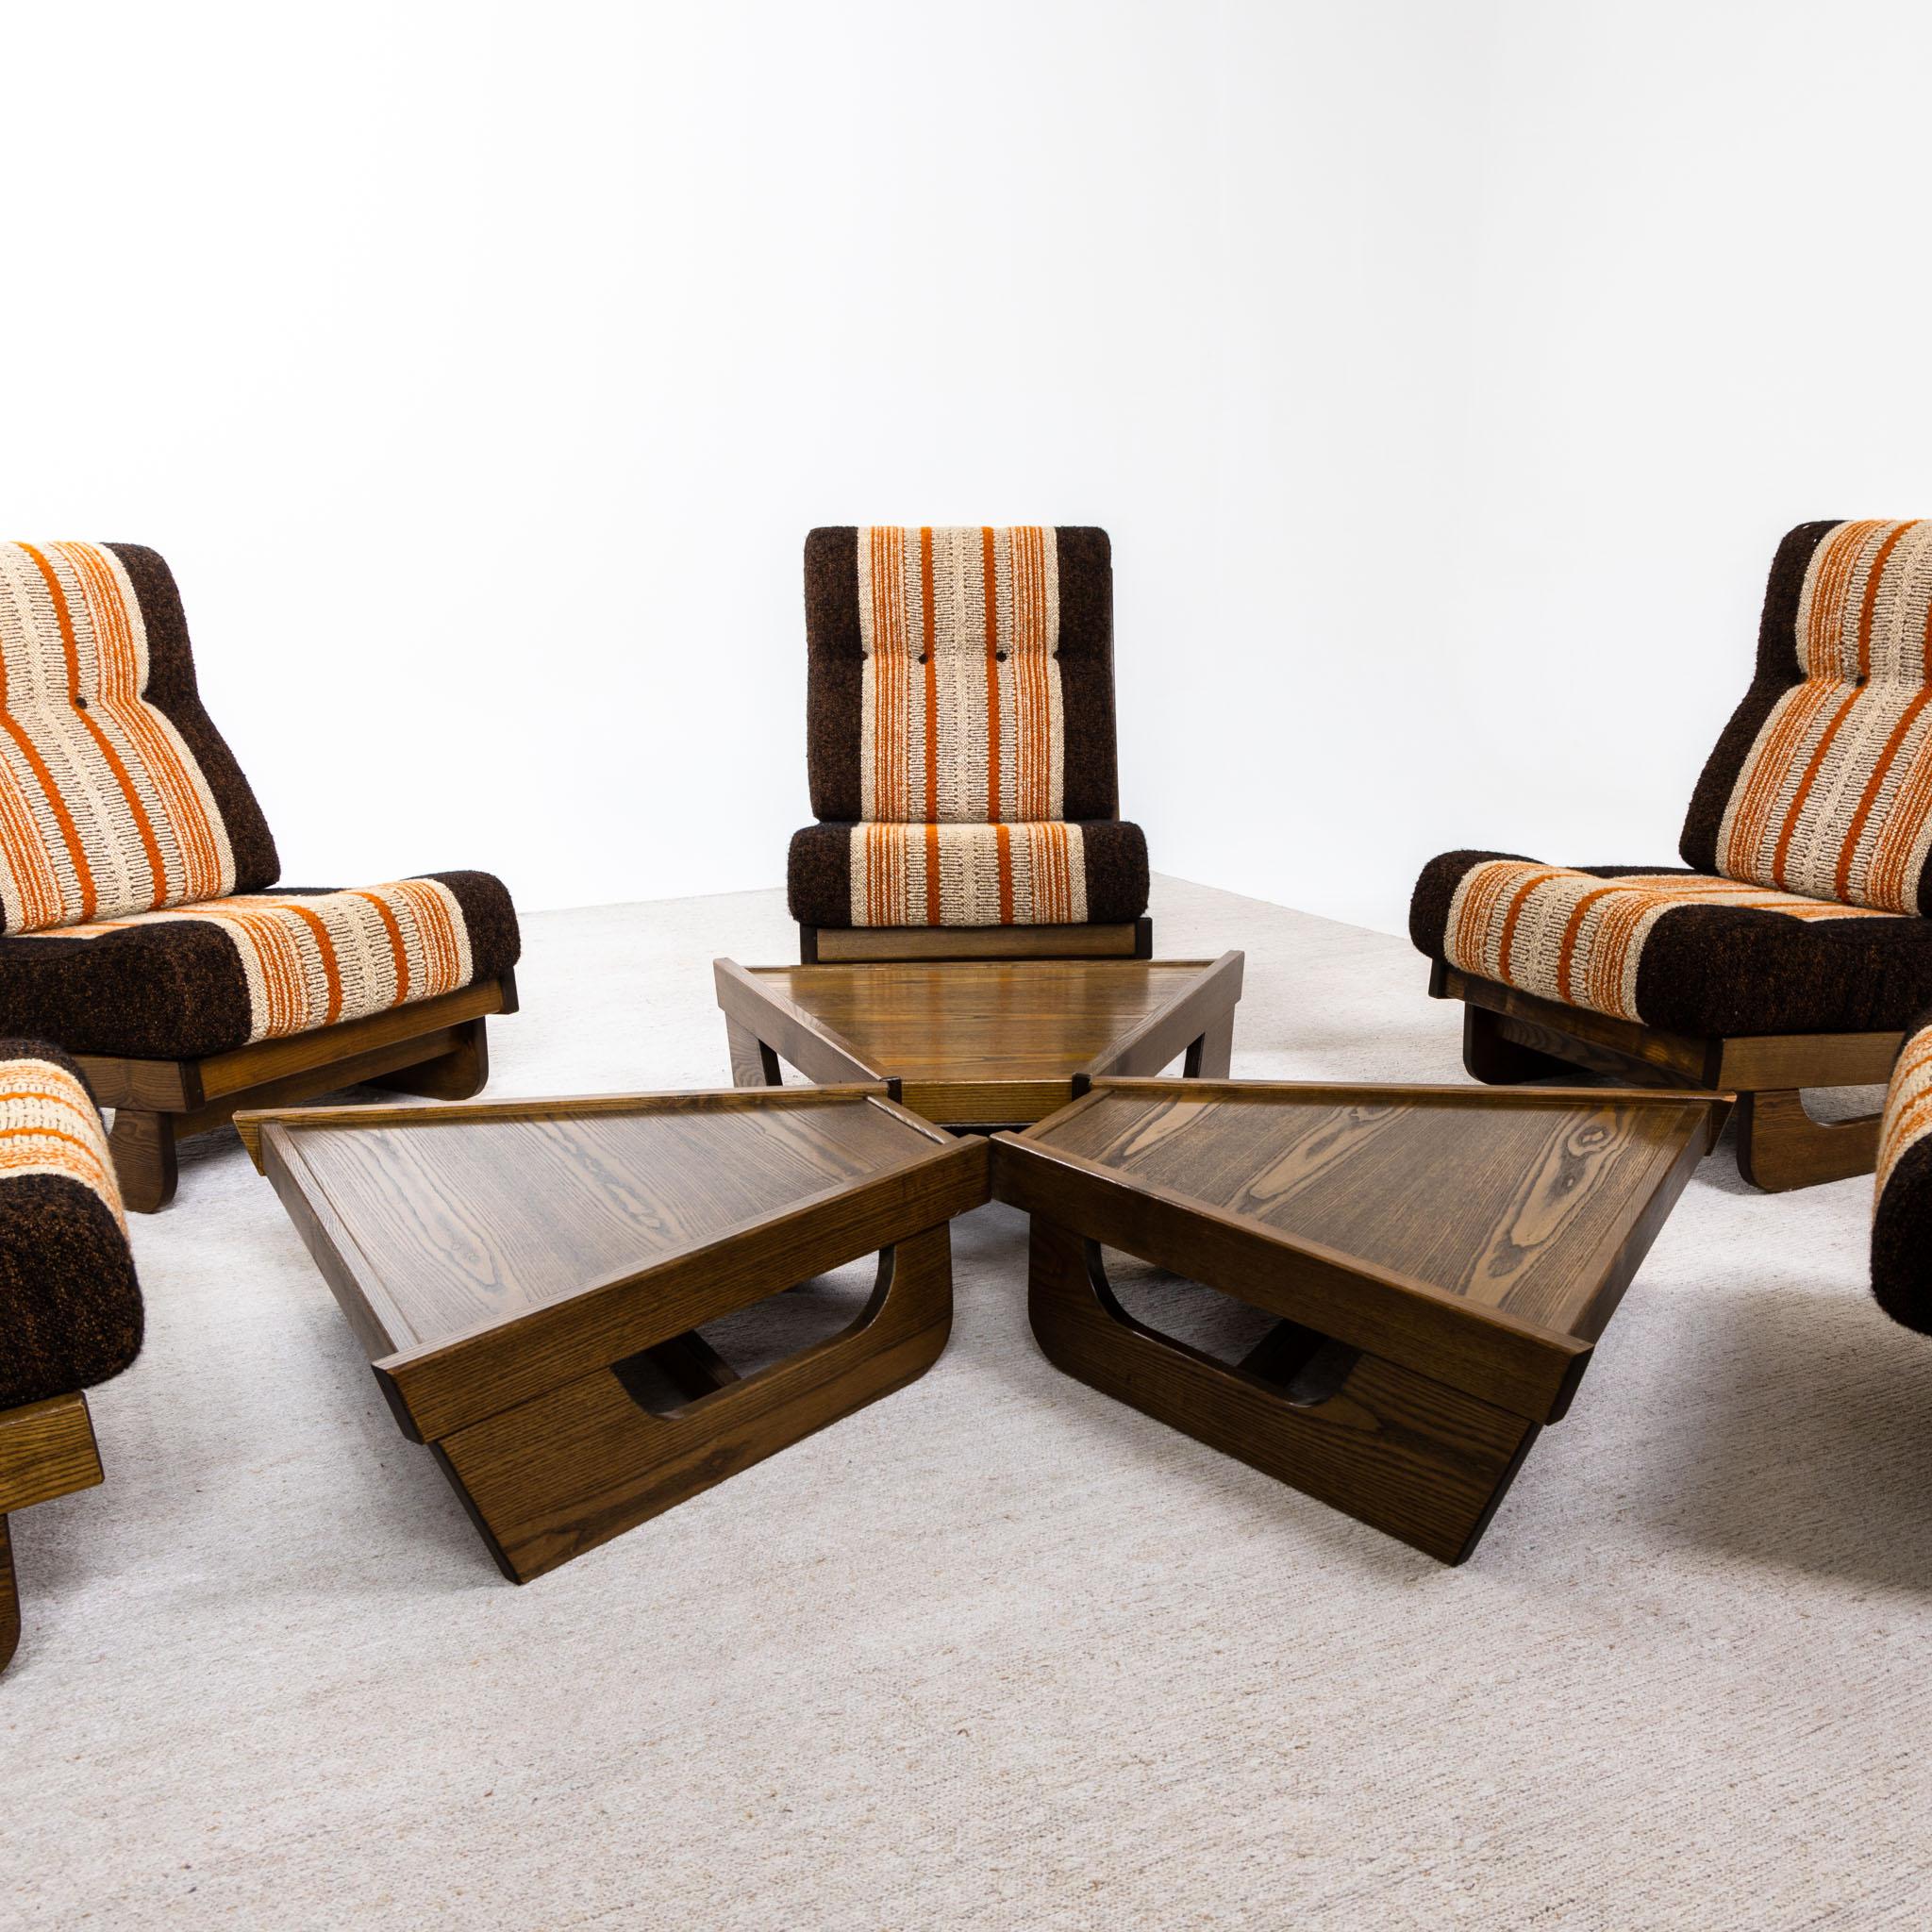 Wood Modular Seating Group with five Lounge Chairs, Italy 1950s For Sale